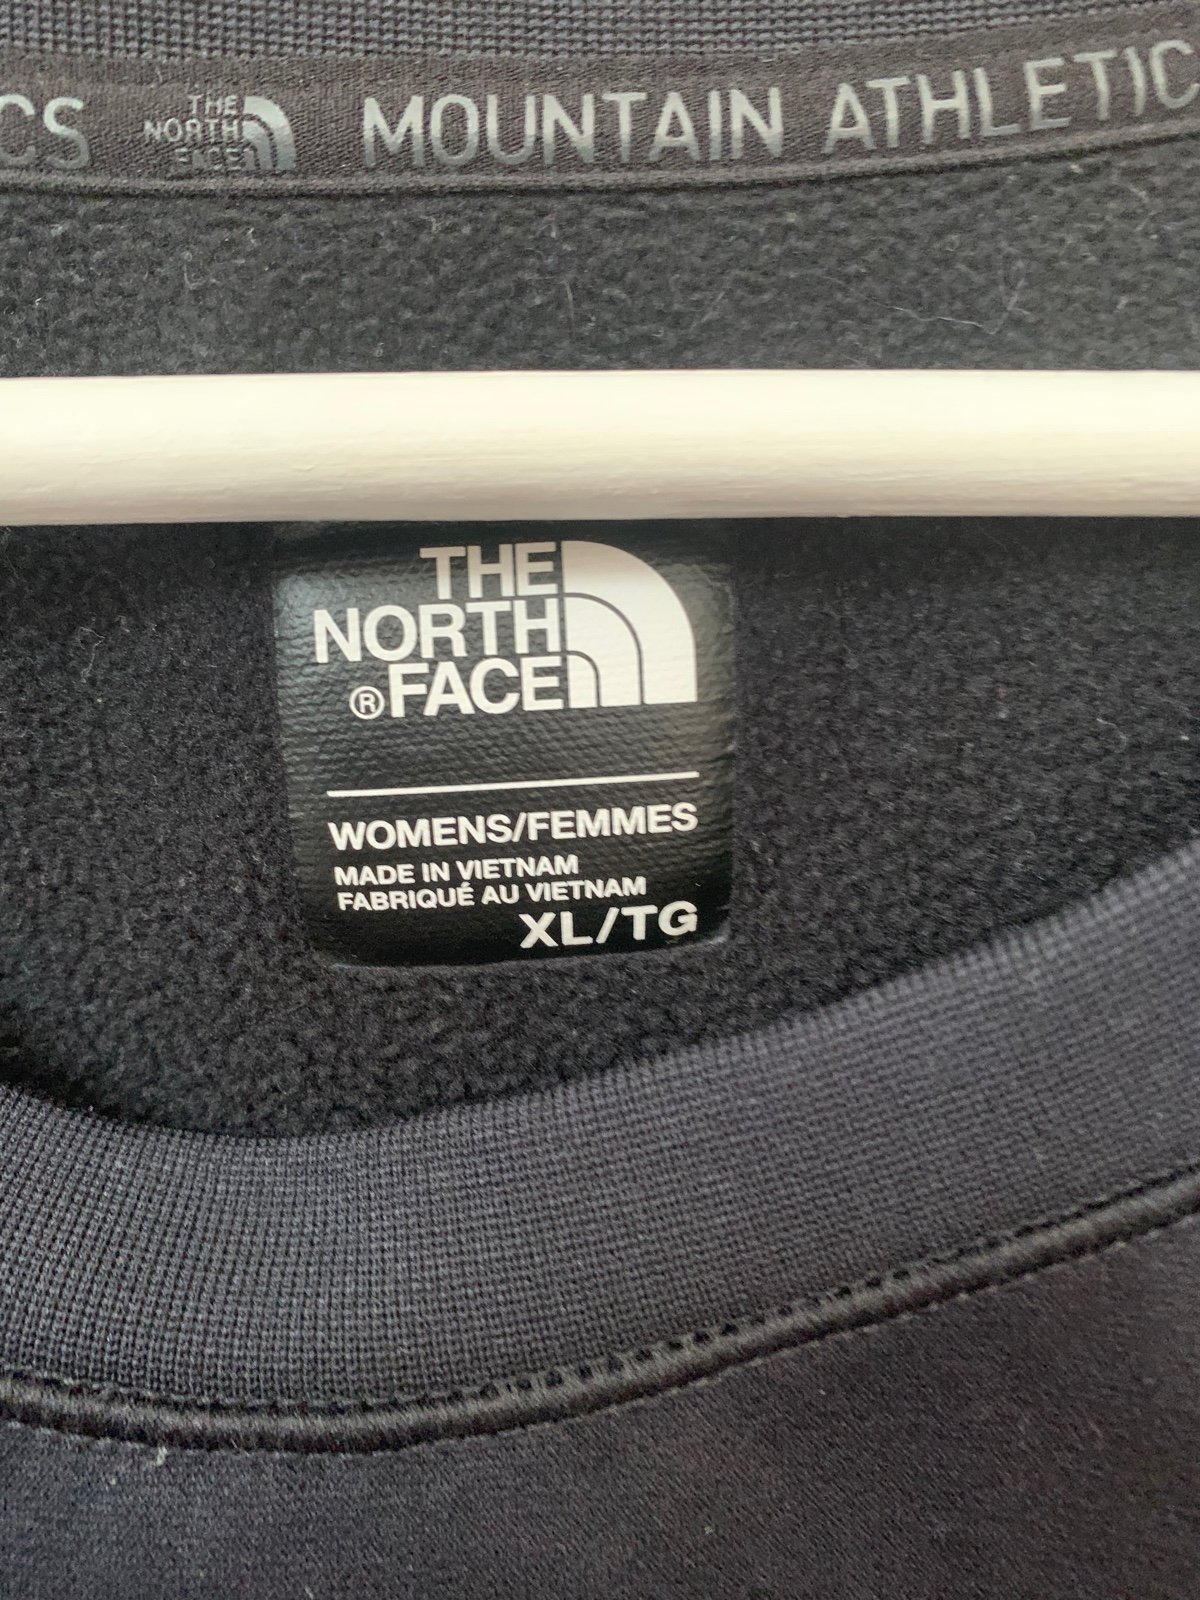 reasonable price The North Face sweater ifYRbLVpn Novel 